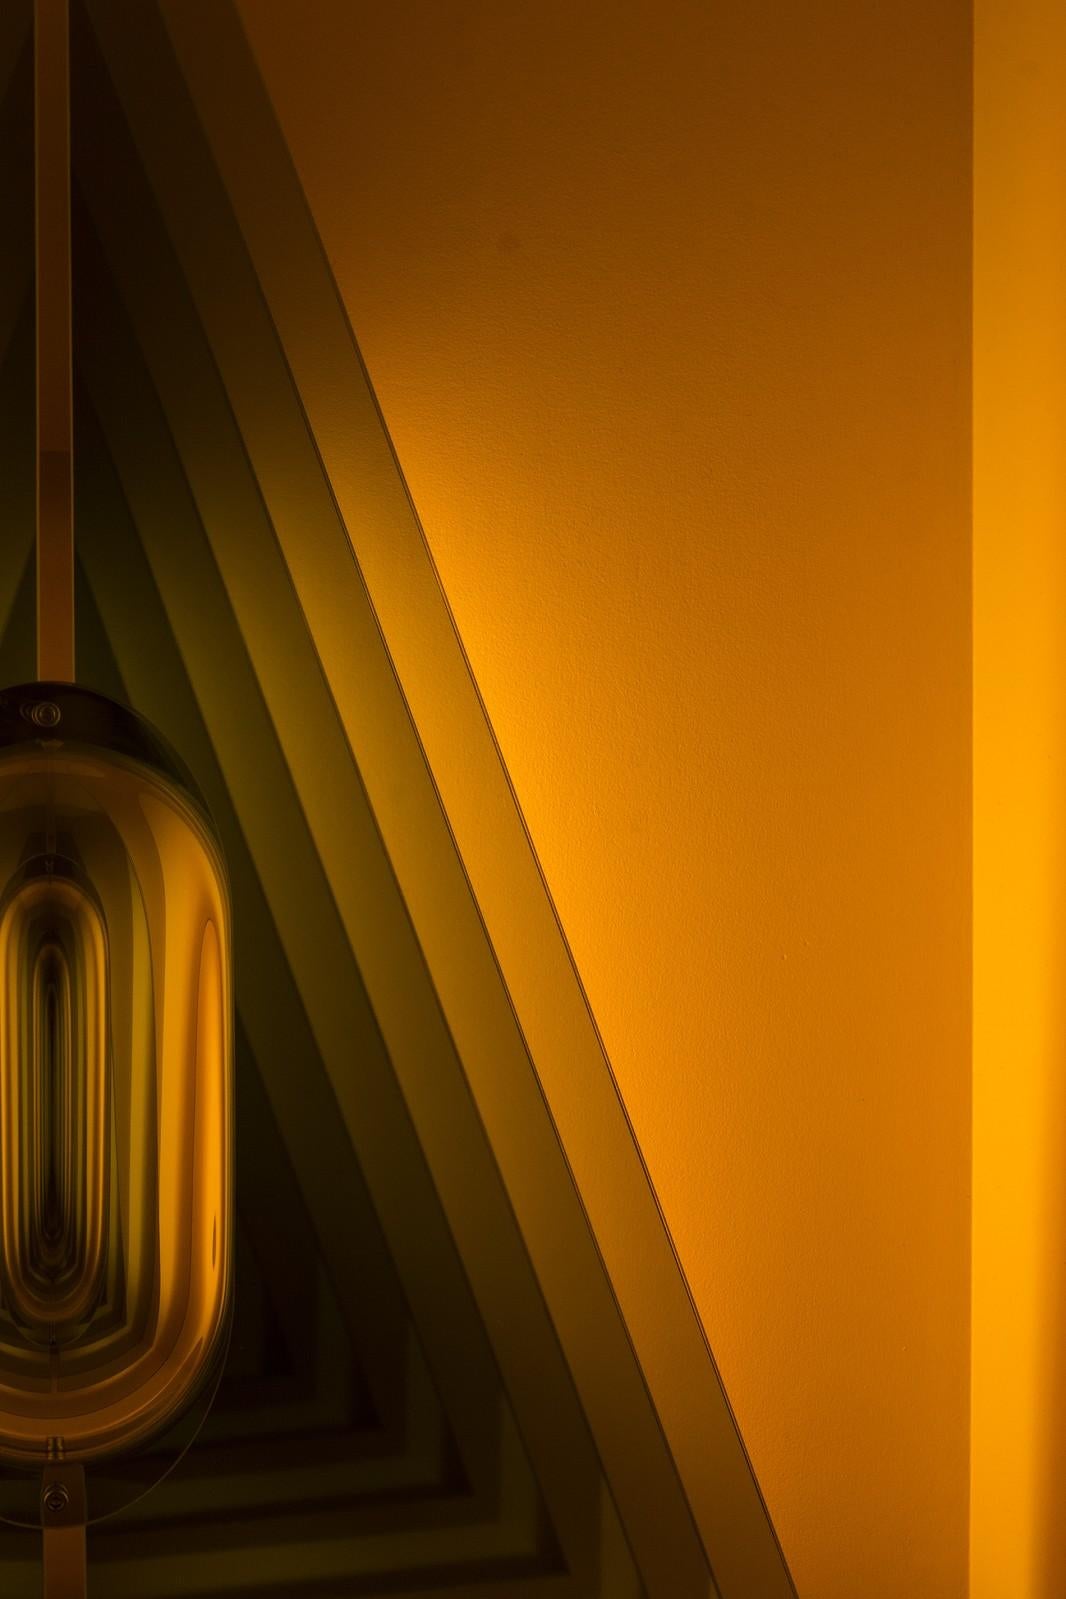 Acute Triangle - Illuminated geometric forms in amber yellow - Contemporary Mixed Media Art by Kenneth Emig